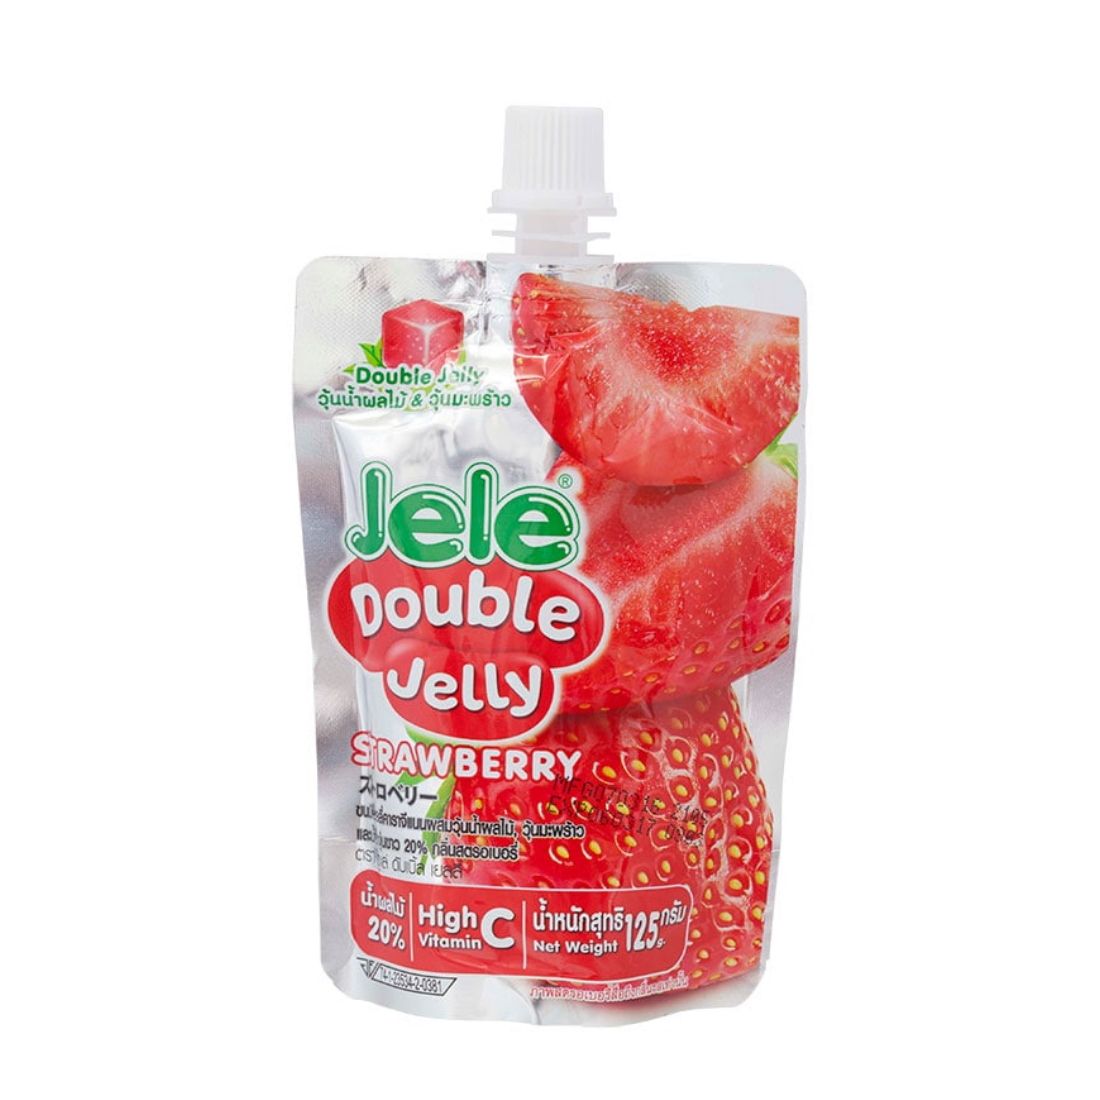 Jele Double Jelly Strawberry Flavour 125G.